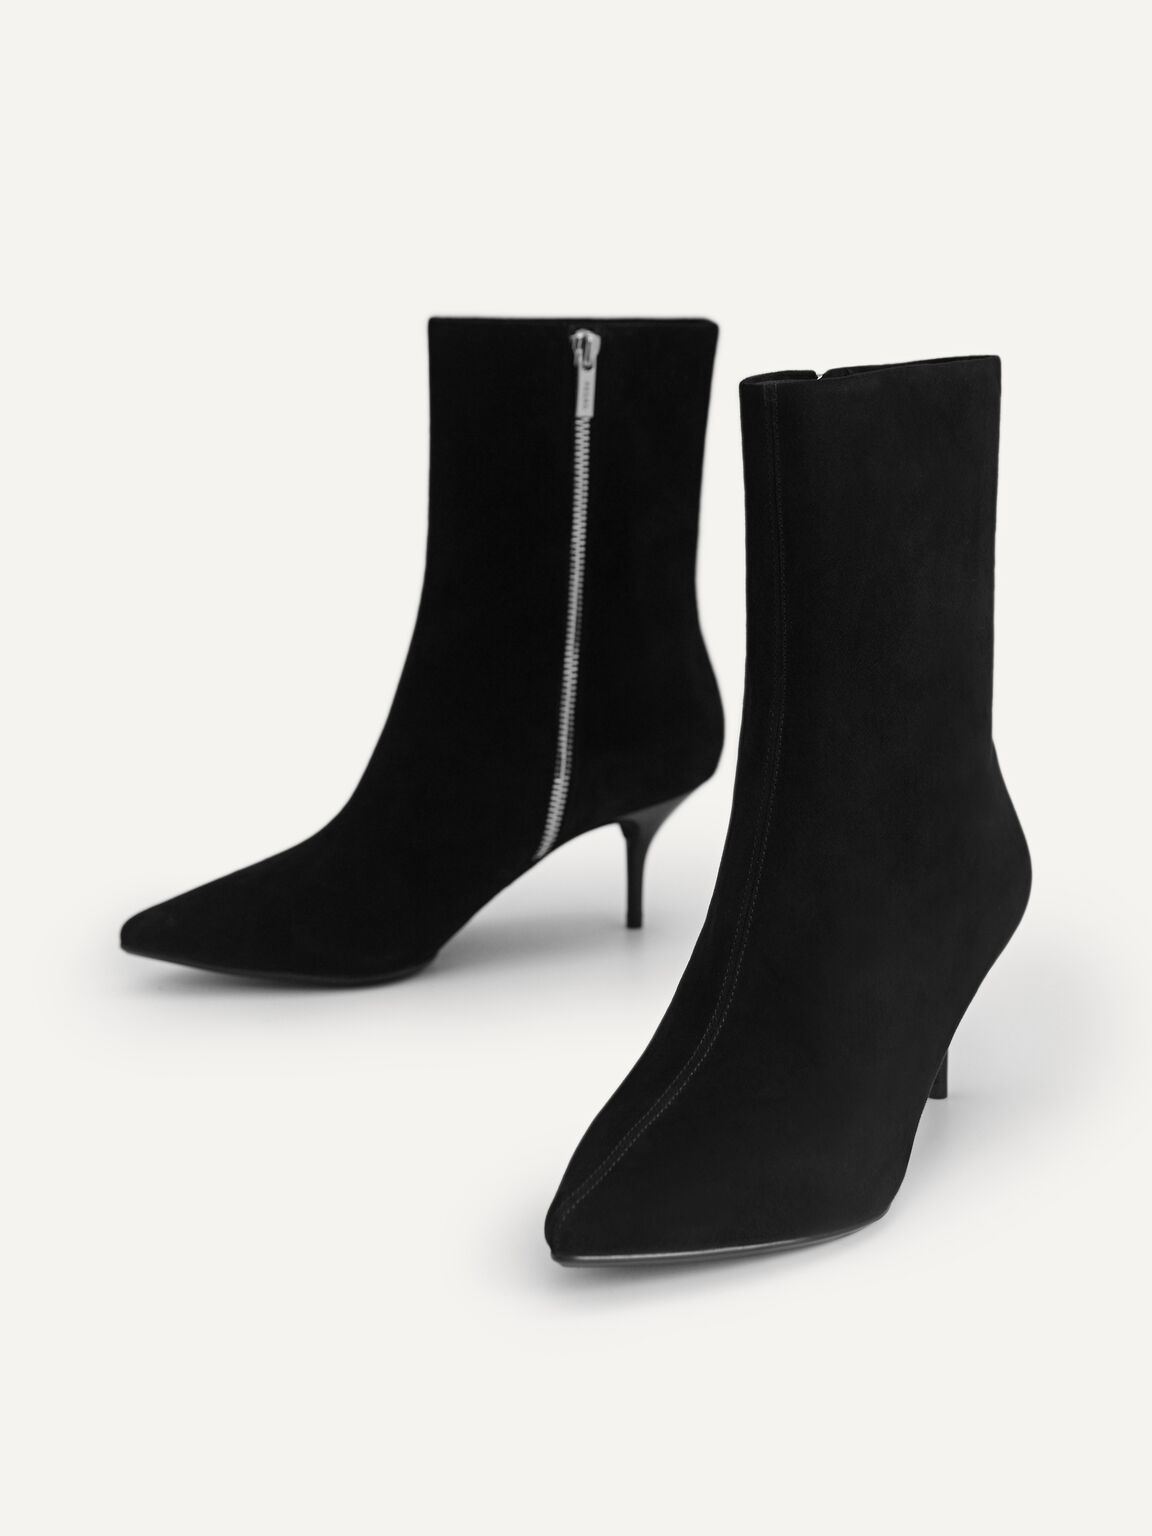 Suede Leather Ankle Boots, Black